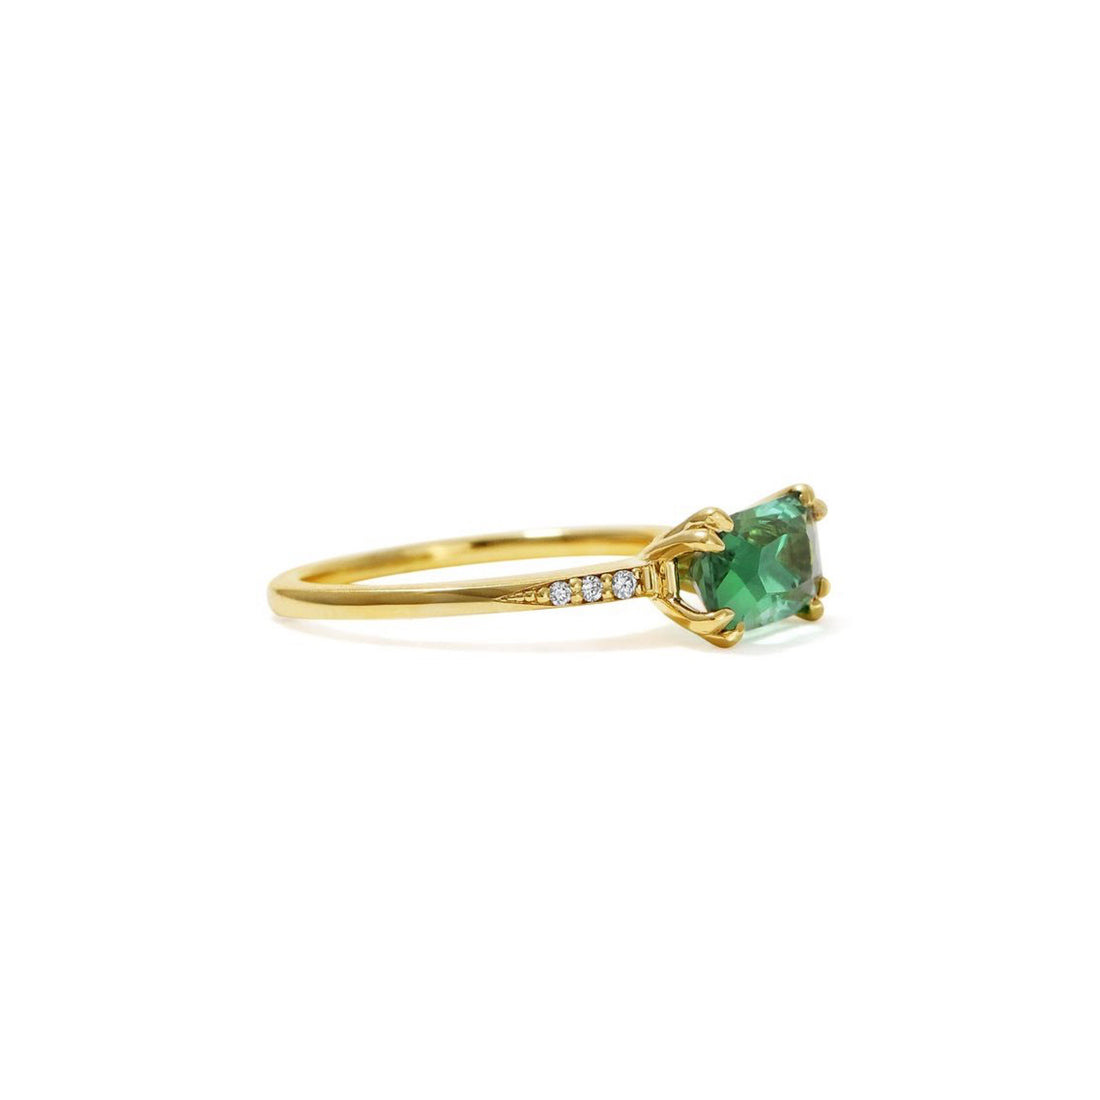  Mint Green Tourmaline & Diamond Ring by Michelle Oh | The Cut London